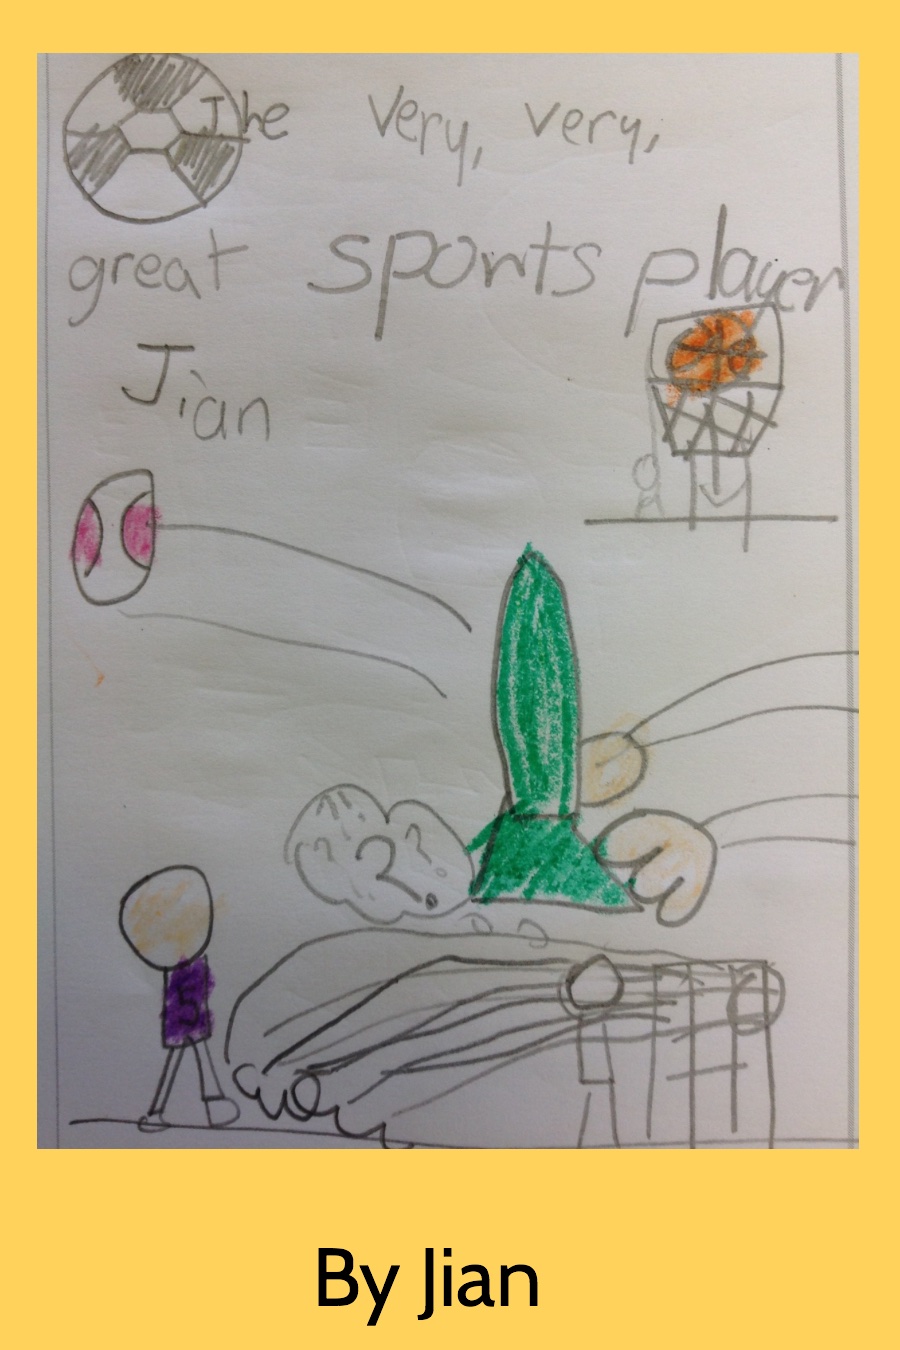 The Very Very Great Sports Player by Jian